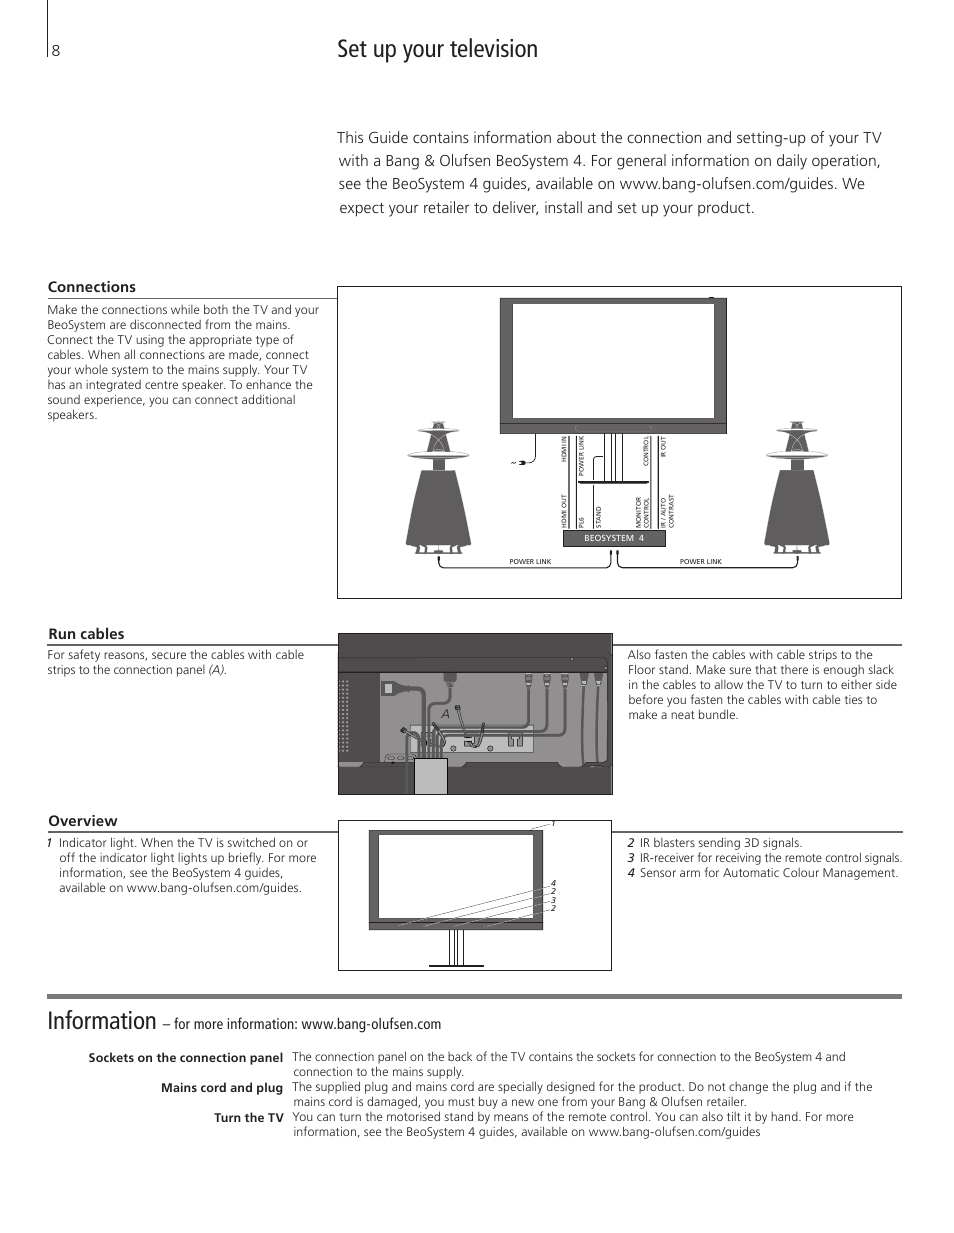 English, Information, Set up your television | Bang & Olufsen BeoVision 12  (Floor Stand) User Manual | Page 8 / 48